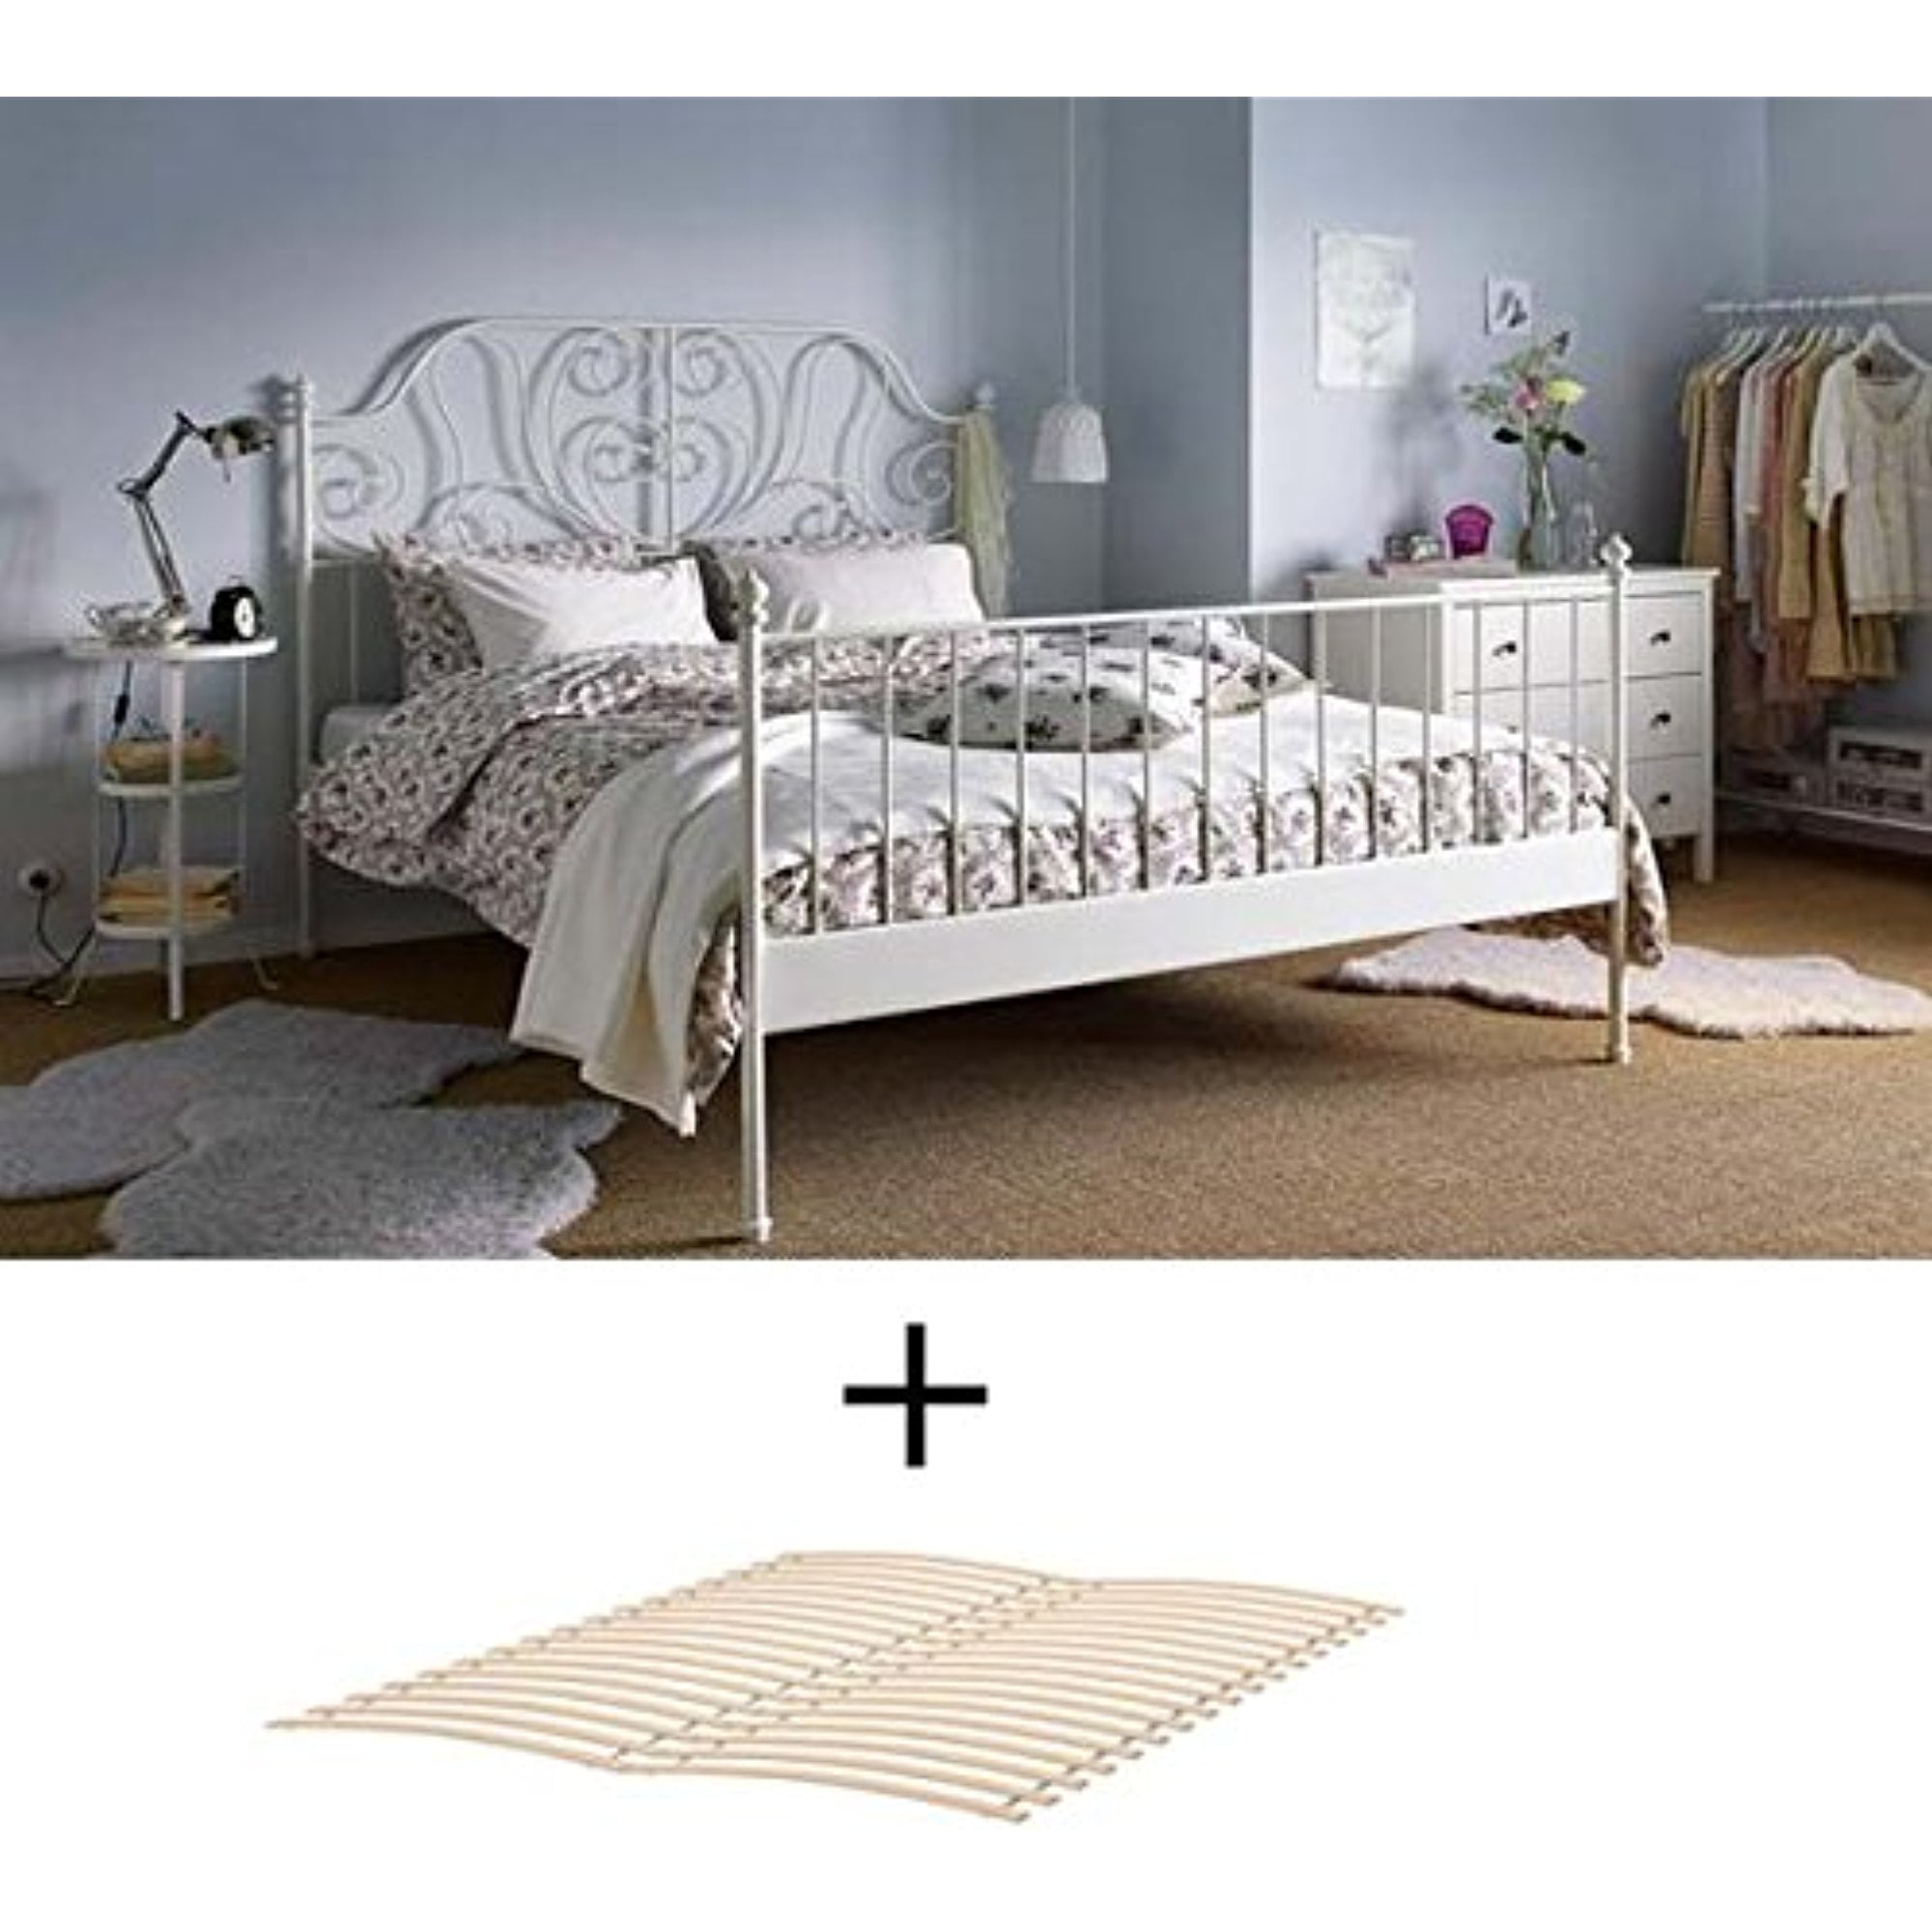 Bed Frame With Slatted Base, Ikea White Iron Bed Frame